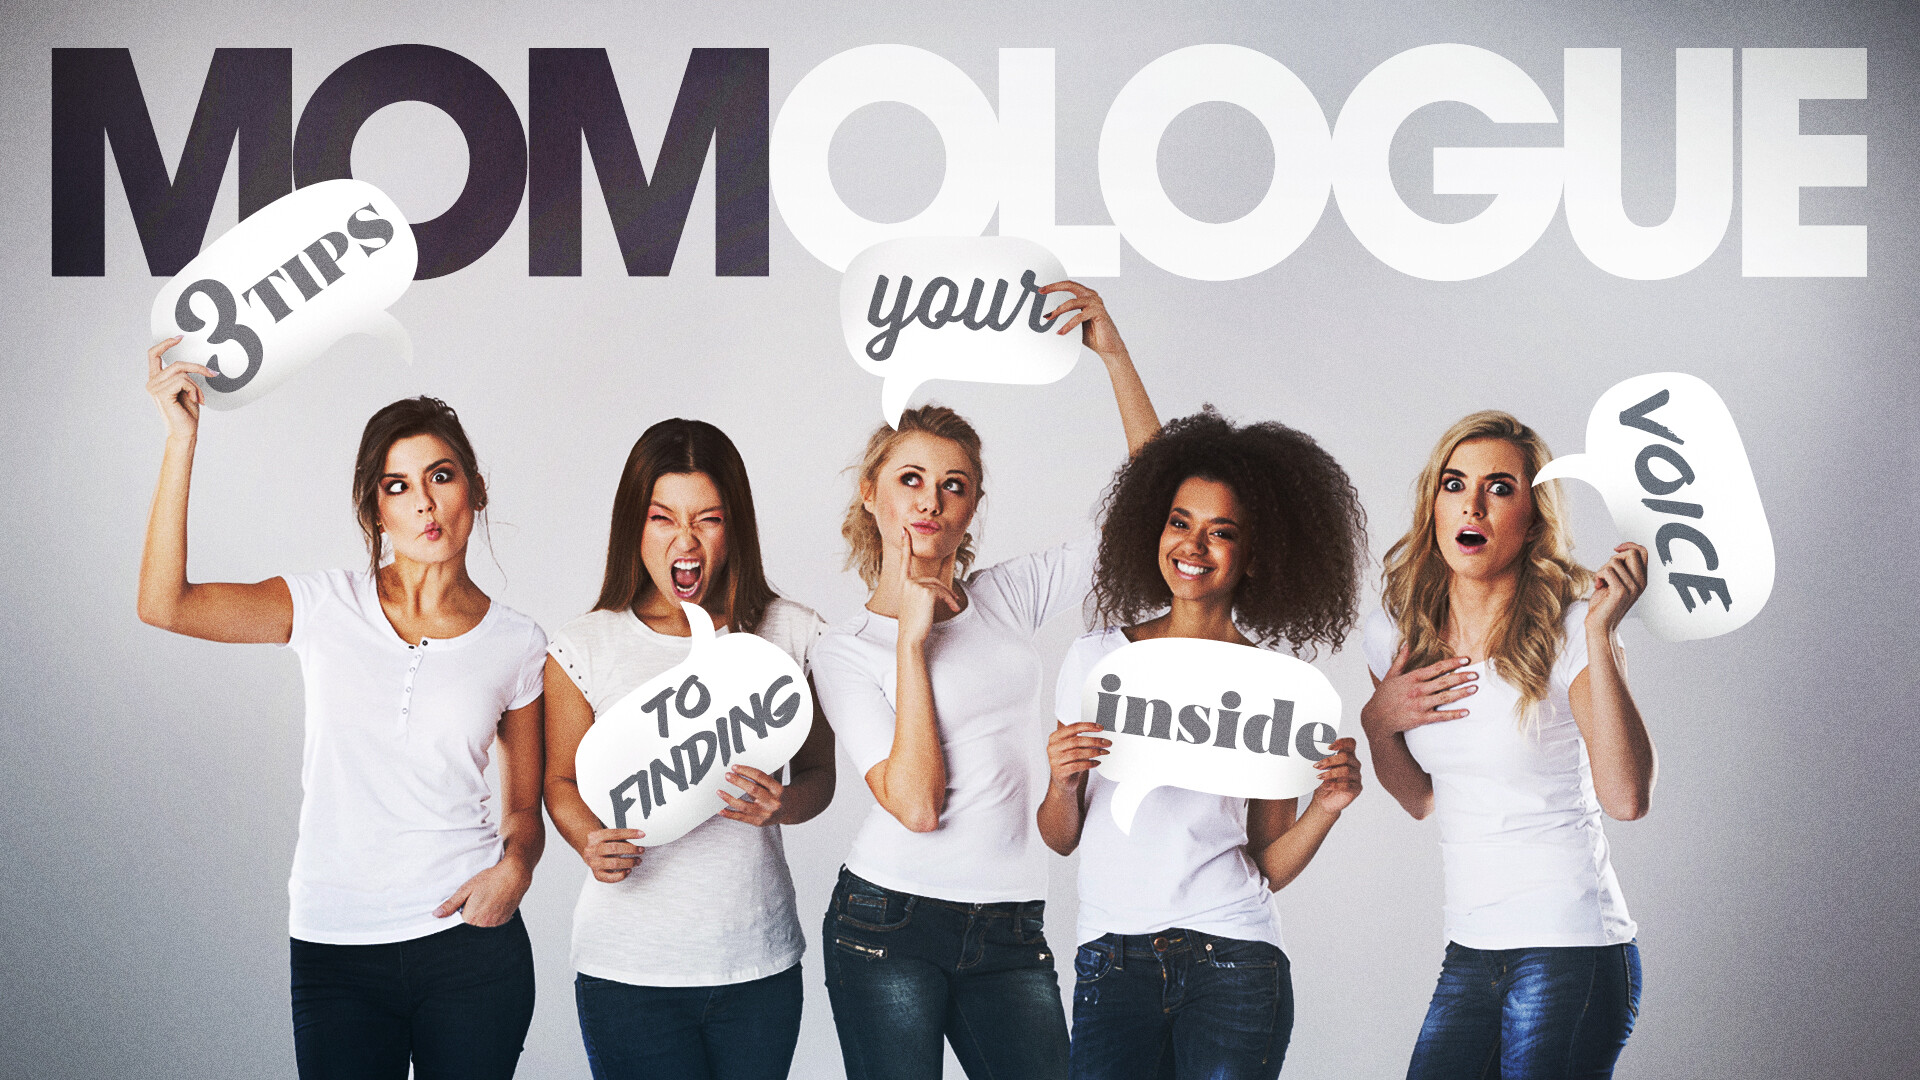 Momologue: 3 Tips for Finding Your Inside Voice